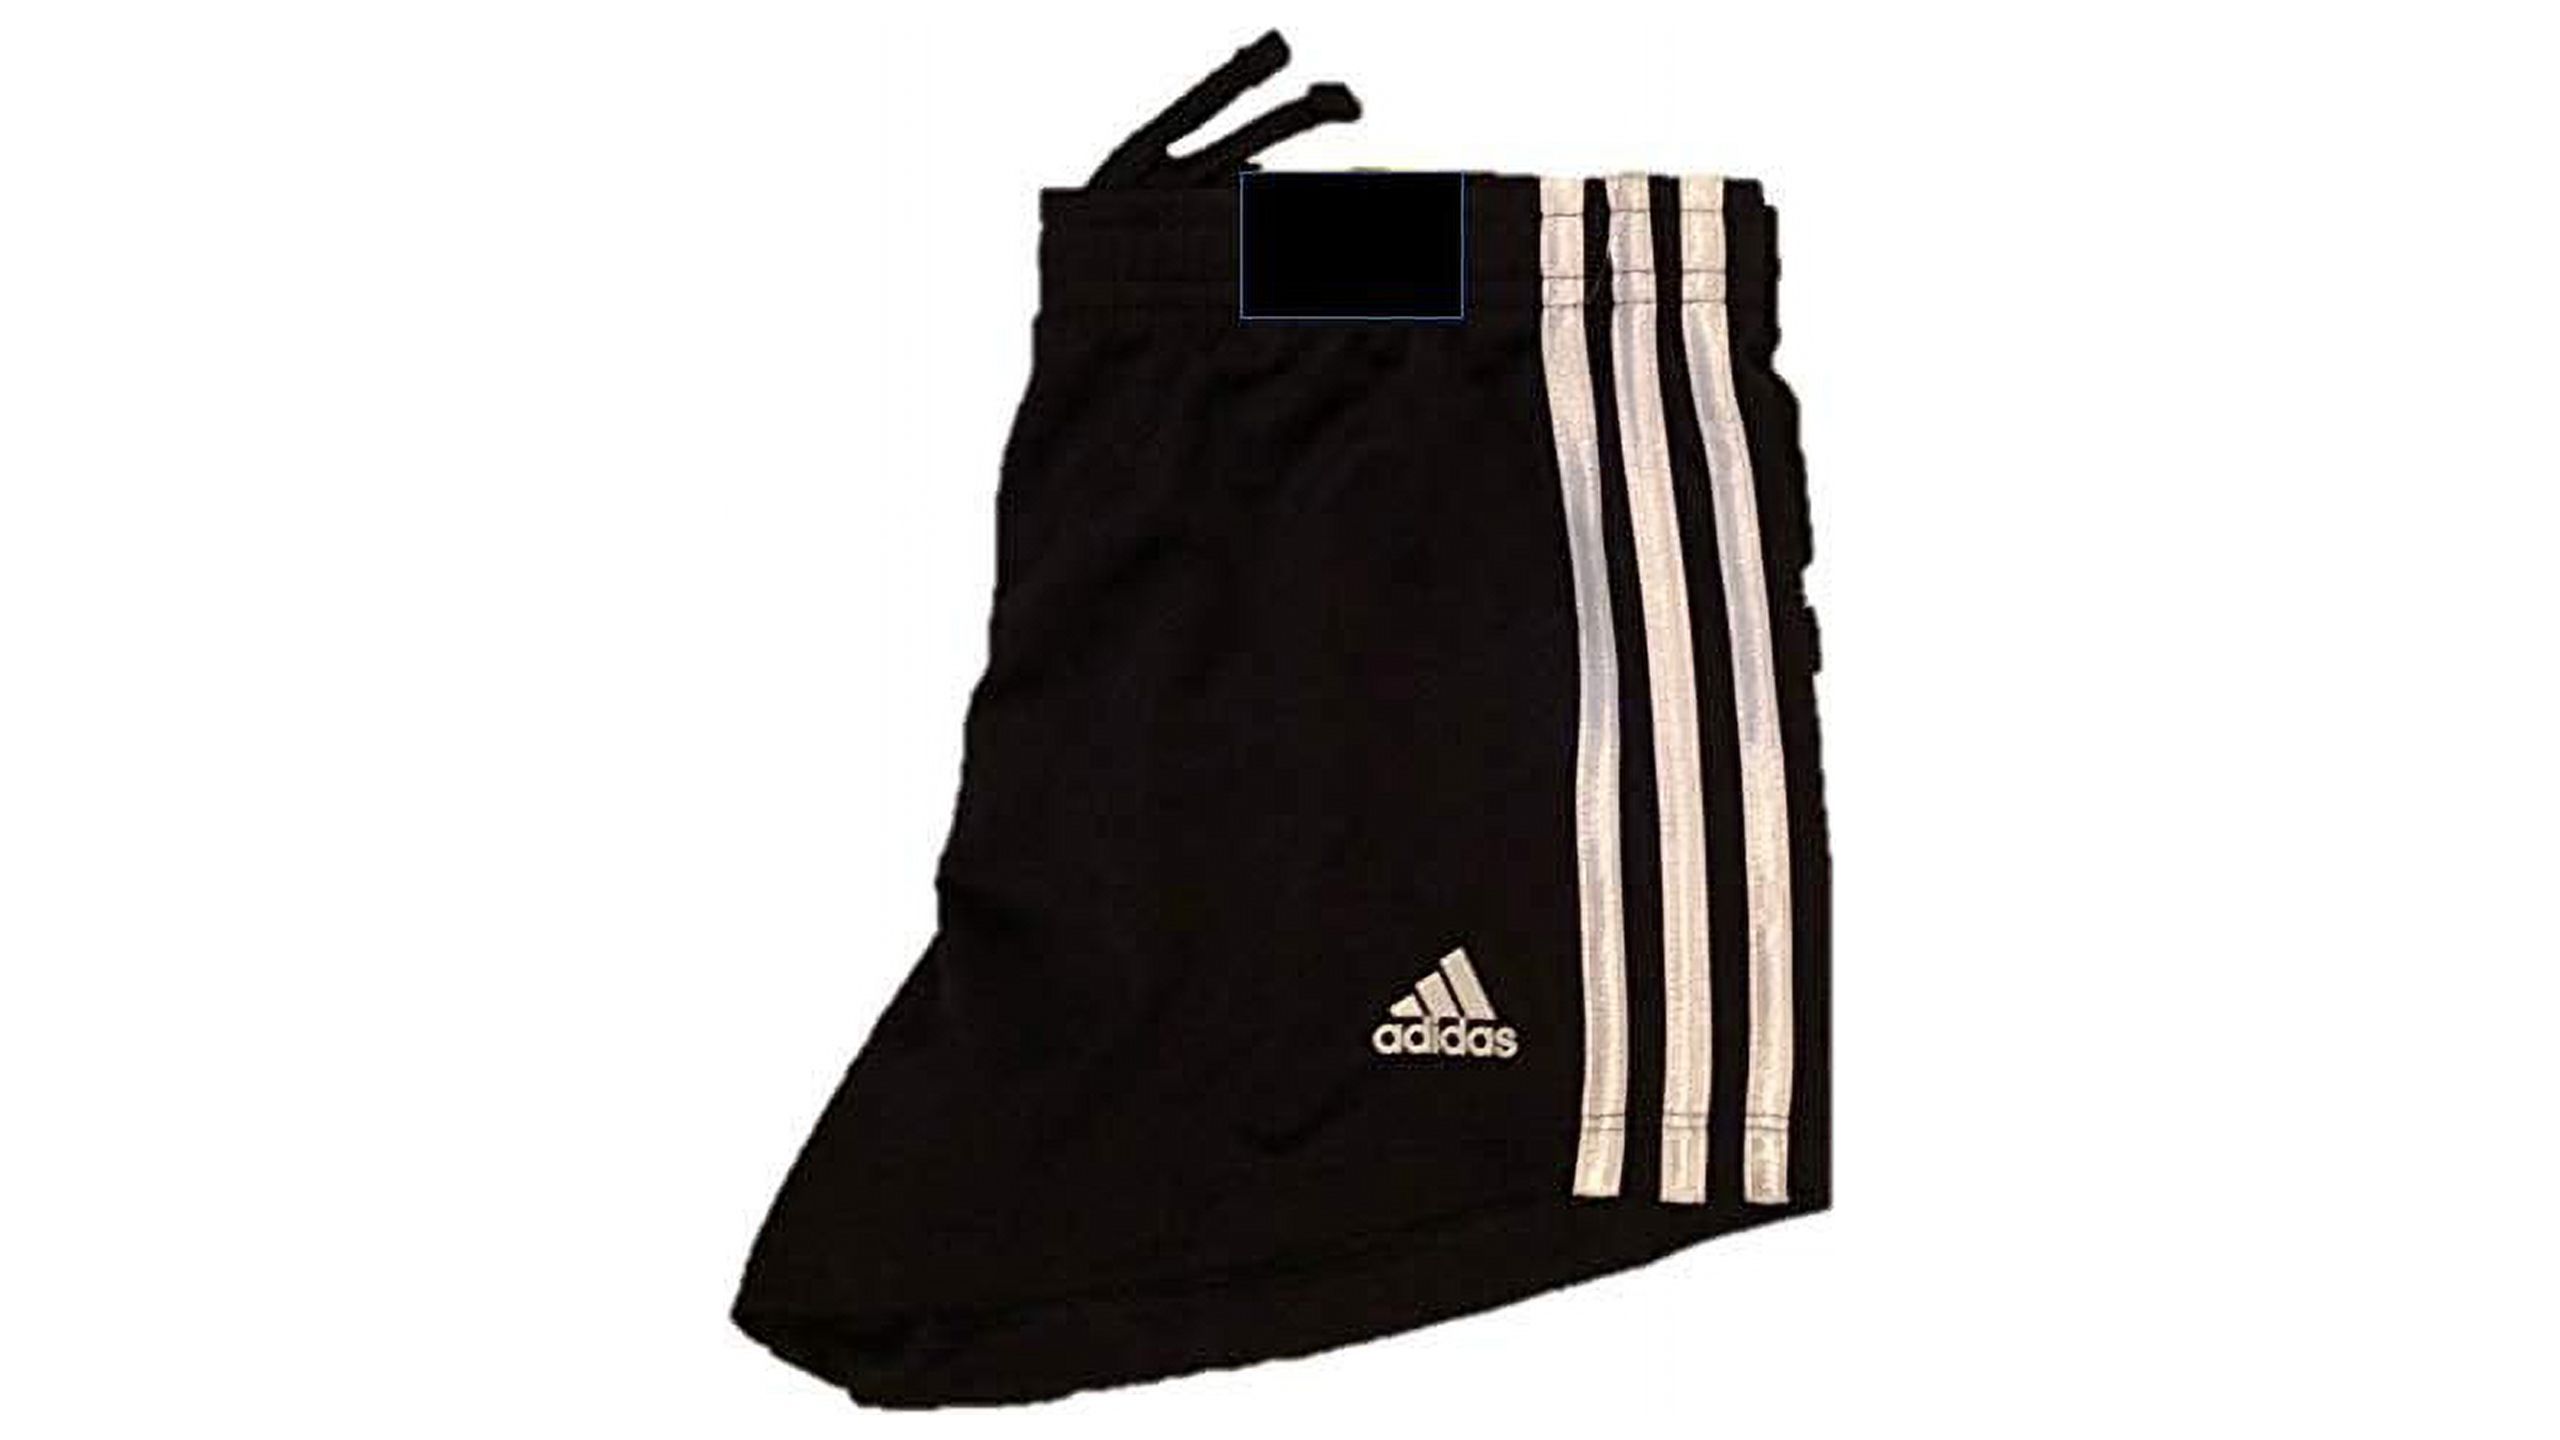 adidas Girls Youth Core Athletic Short Black, Small-7/8 - image 1 of 2